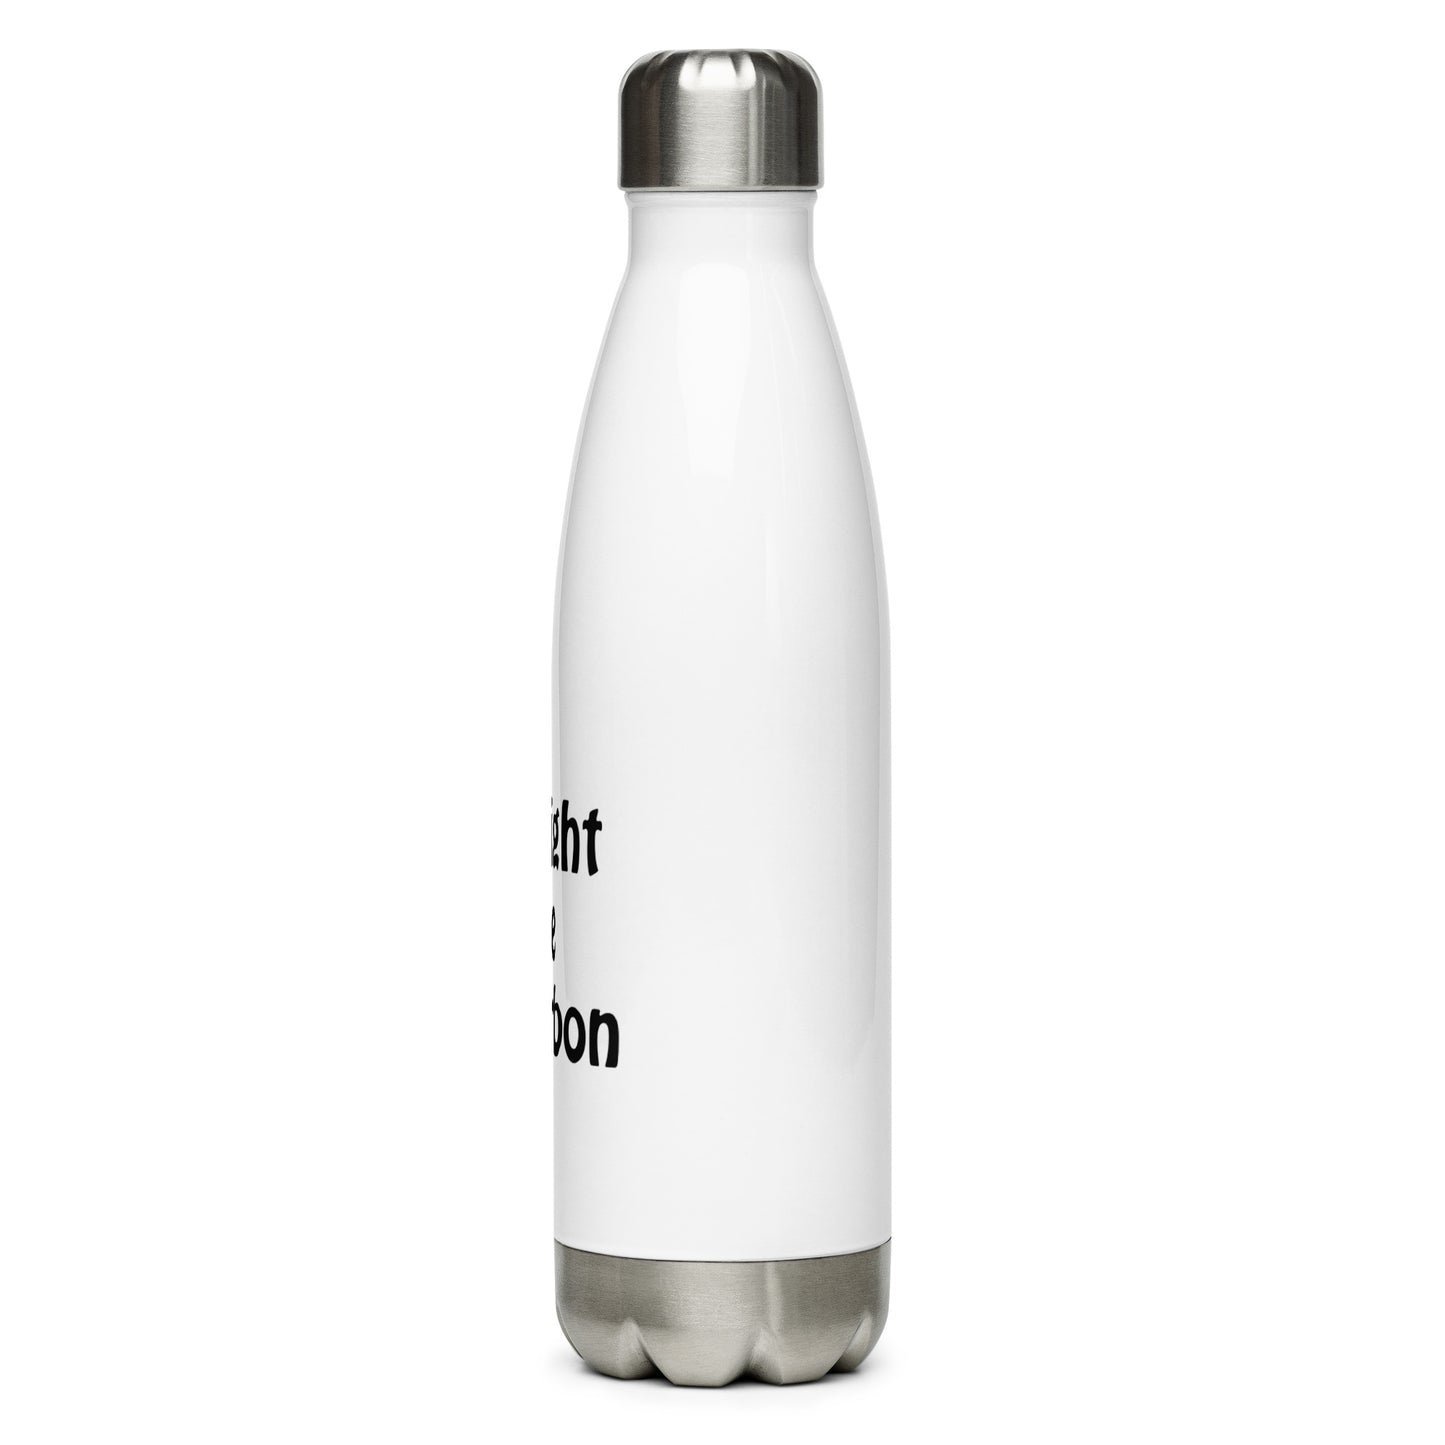 "It Might Be Bourbon" Stainless Steel Water Bottle